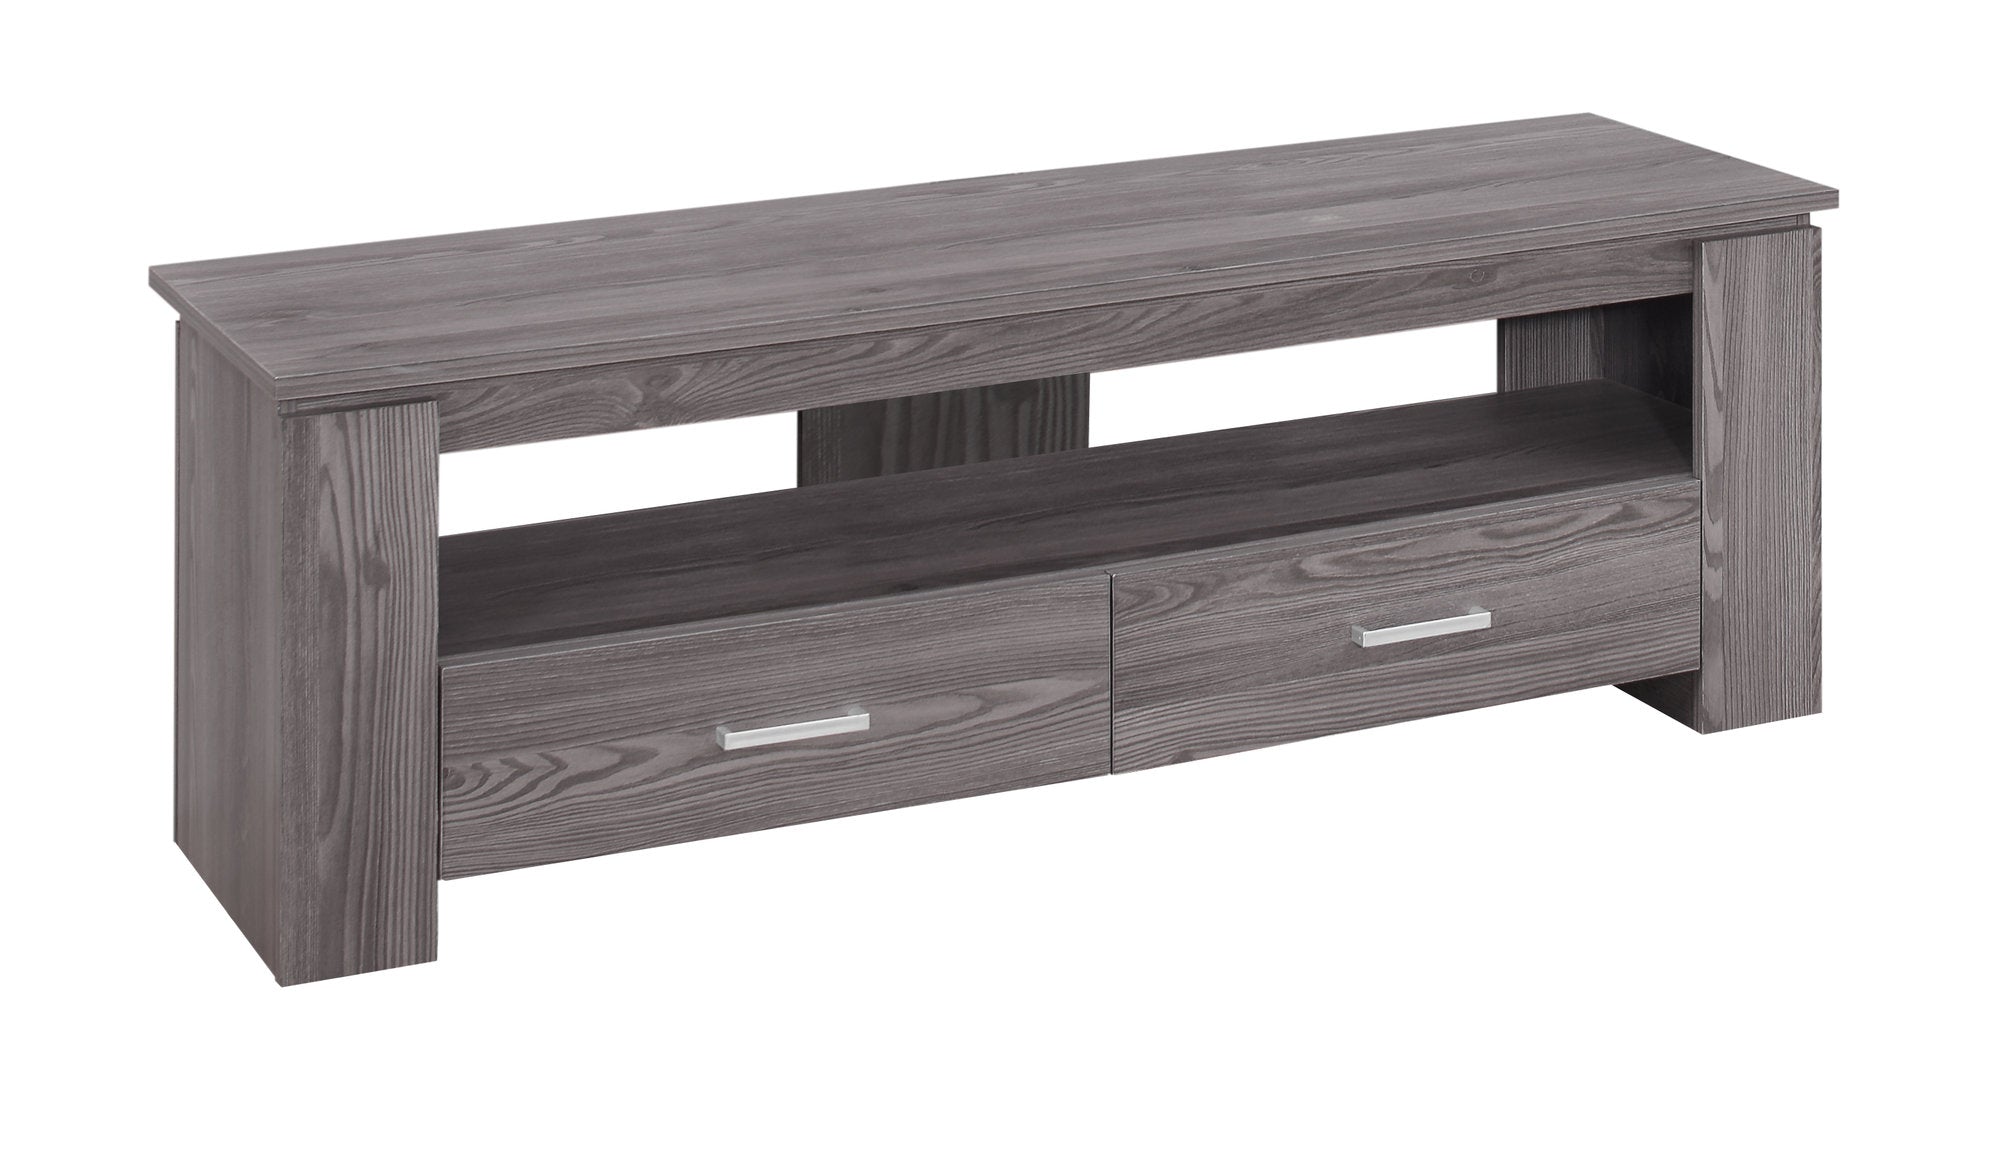 TV STAND - 48"L / DARK TAUPE WITH 2 STORAGE DRAWERS